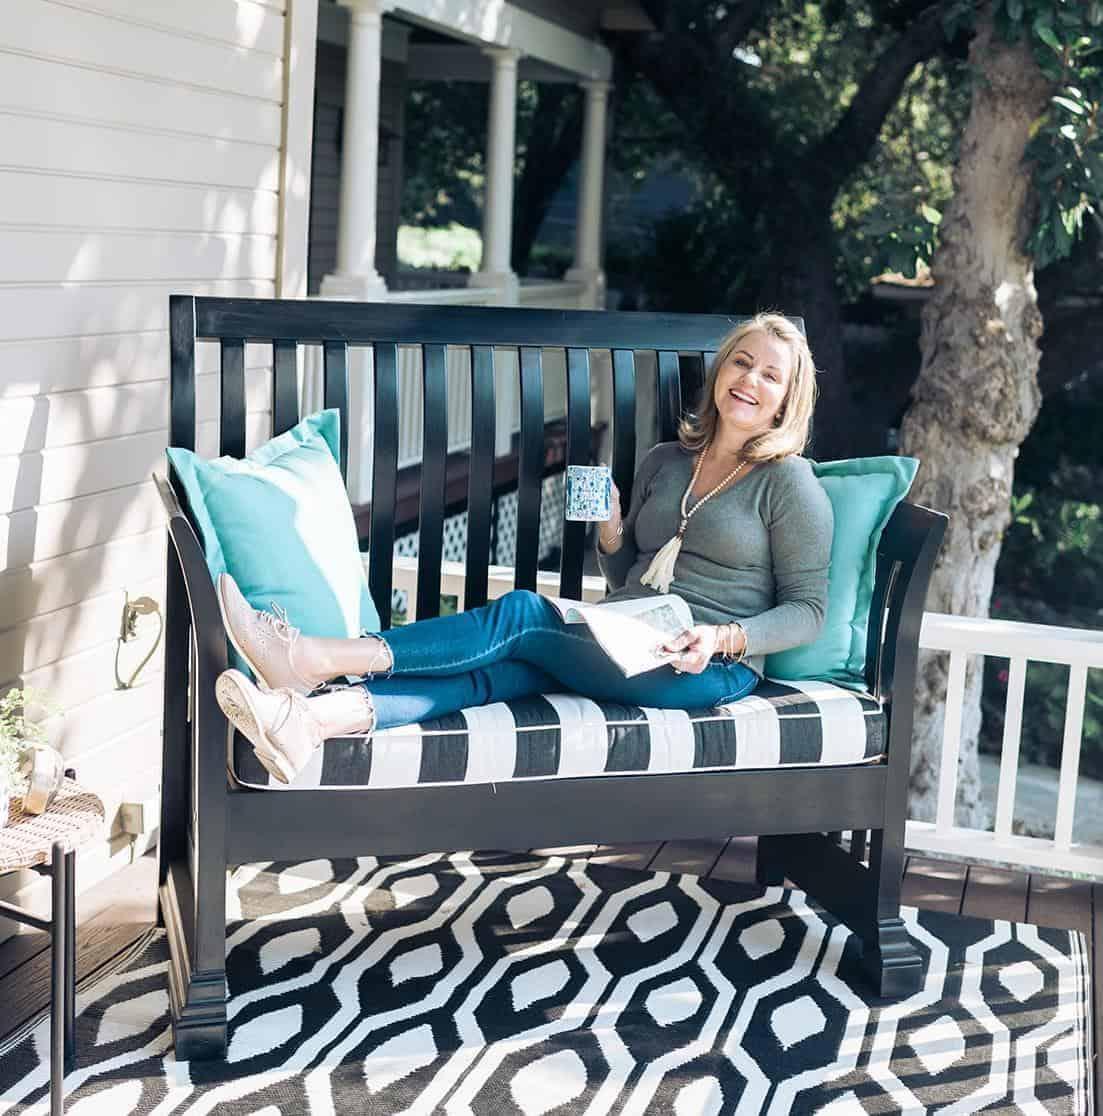 Life is Better on the Porch: The Joys of Porch Life